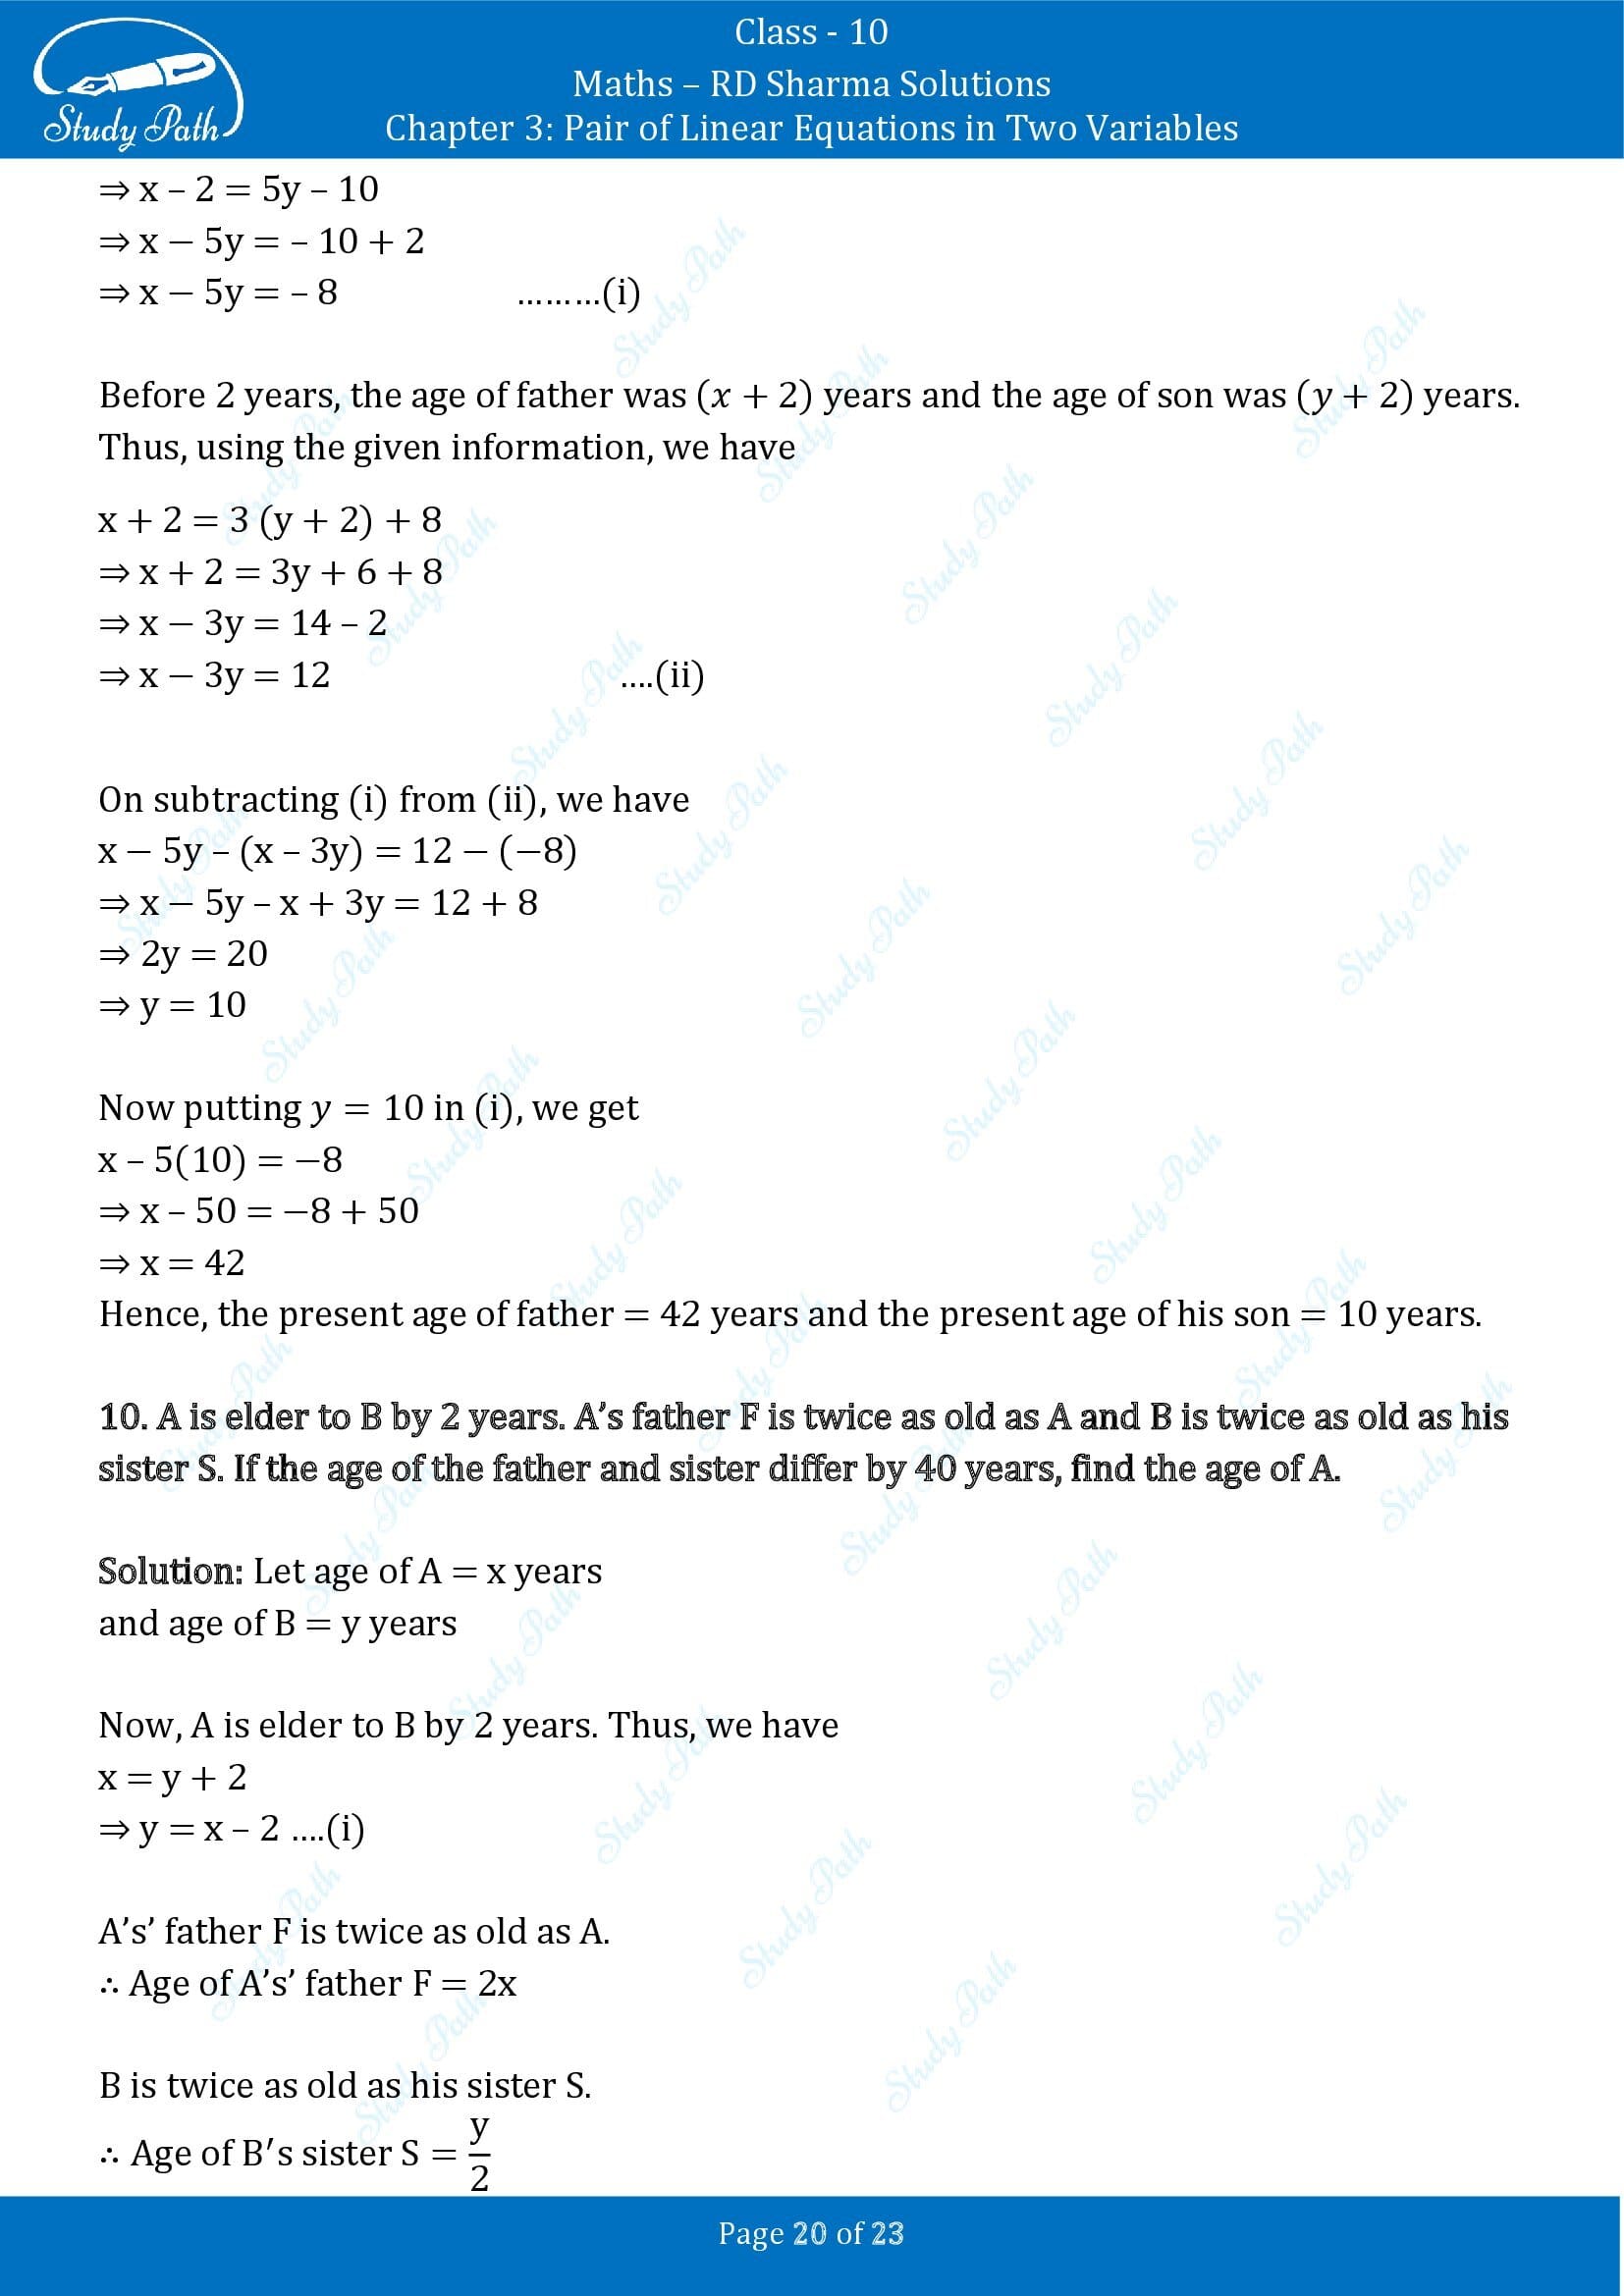 RD Sharma Solutions Class 10 Chapter 3 Pair of Linear Equations in Two Variables Exercise 3.8 00020